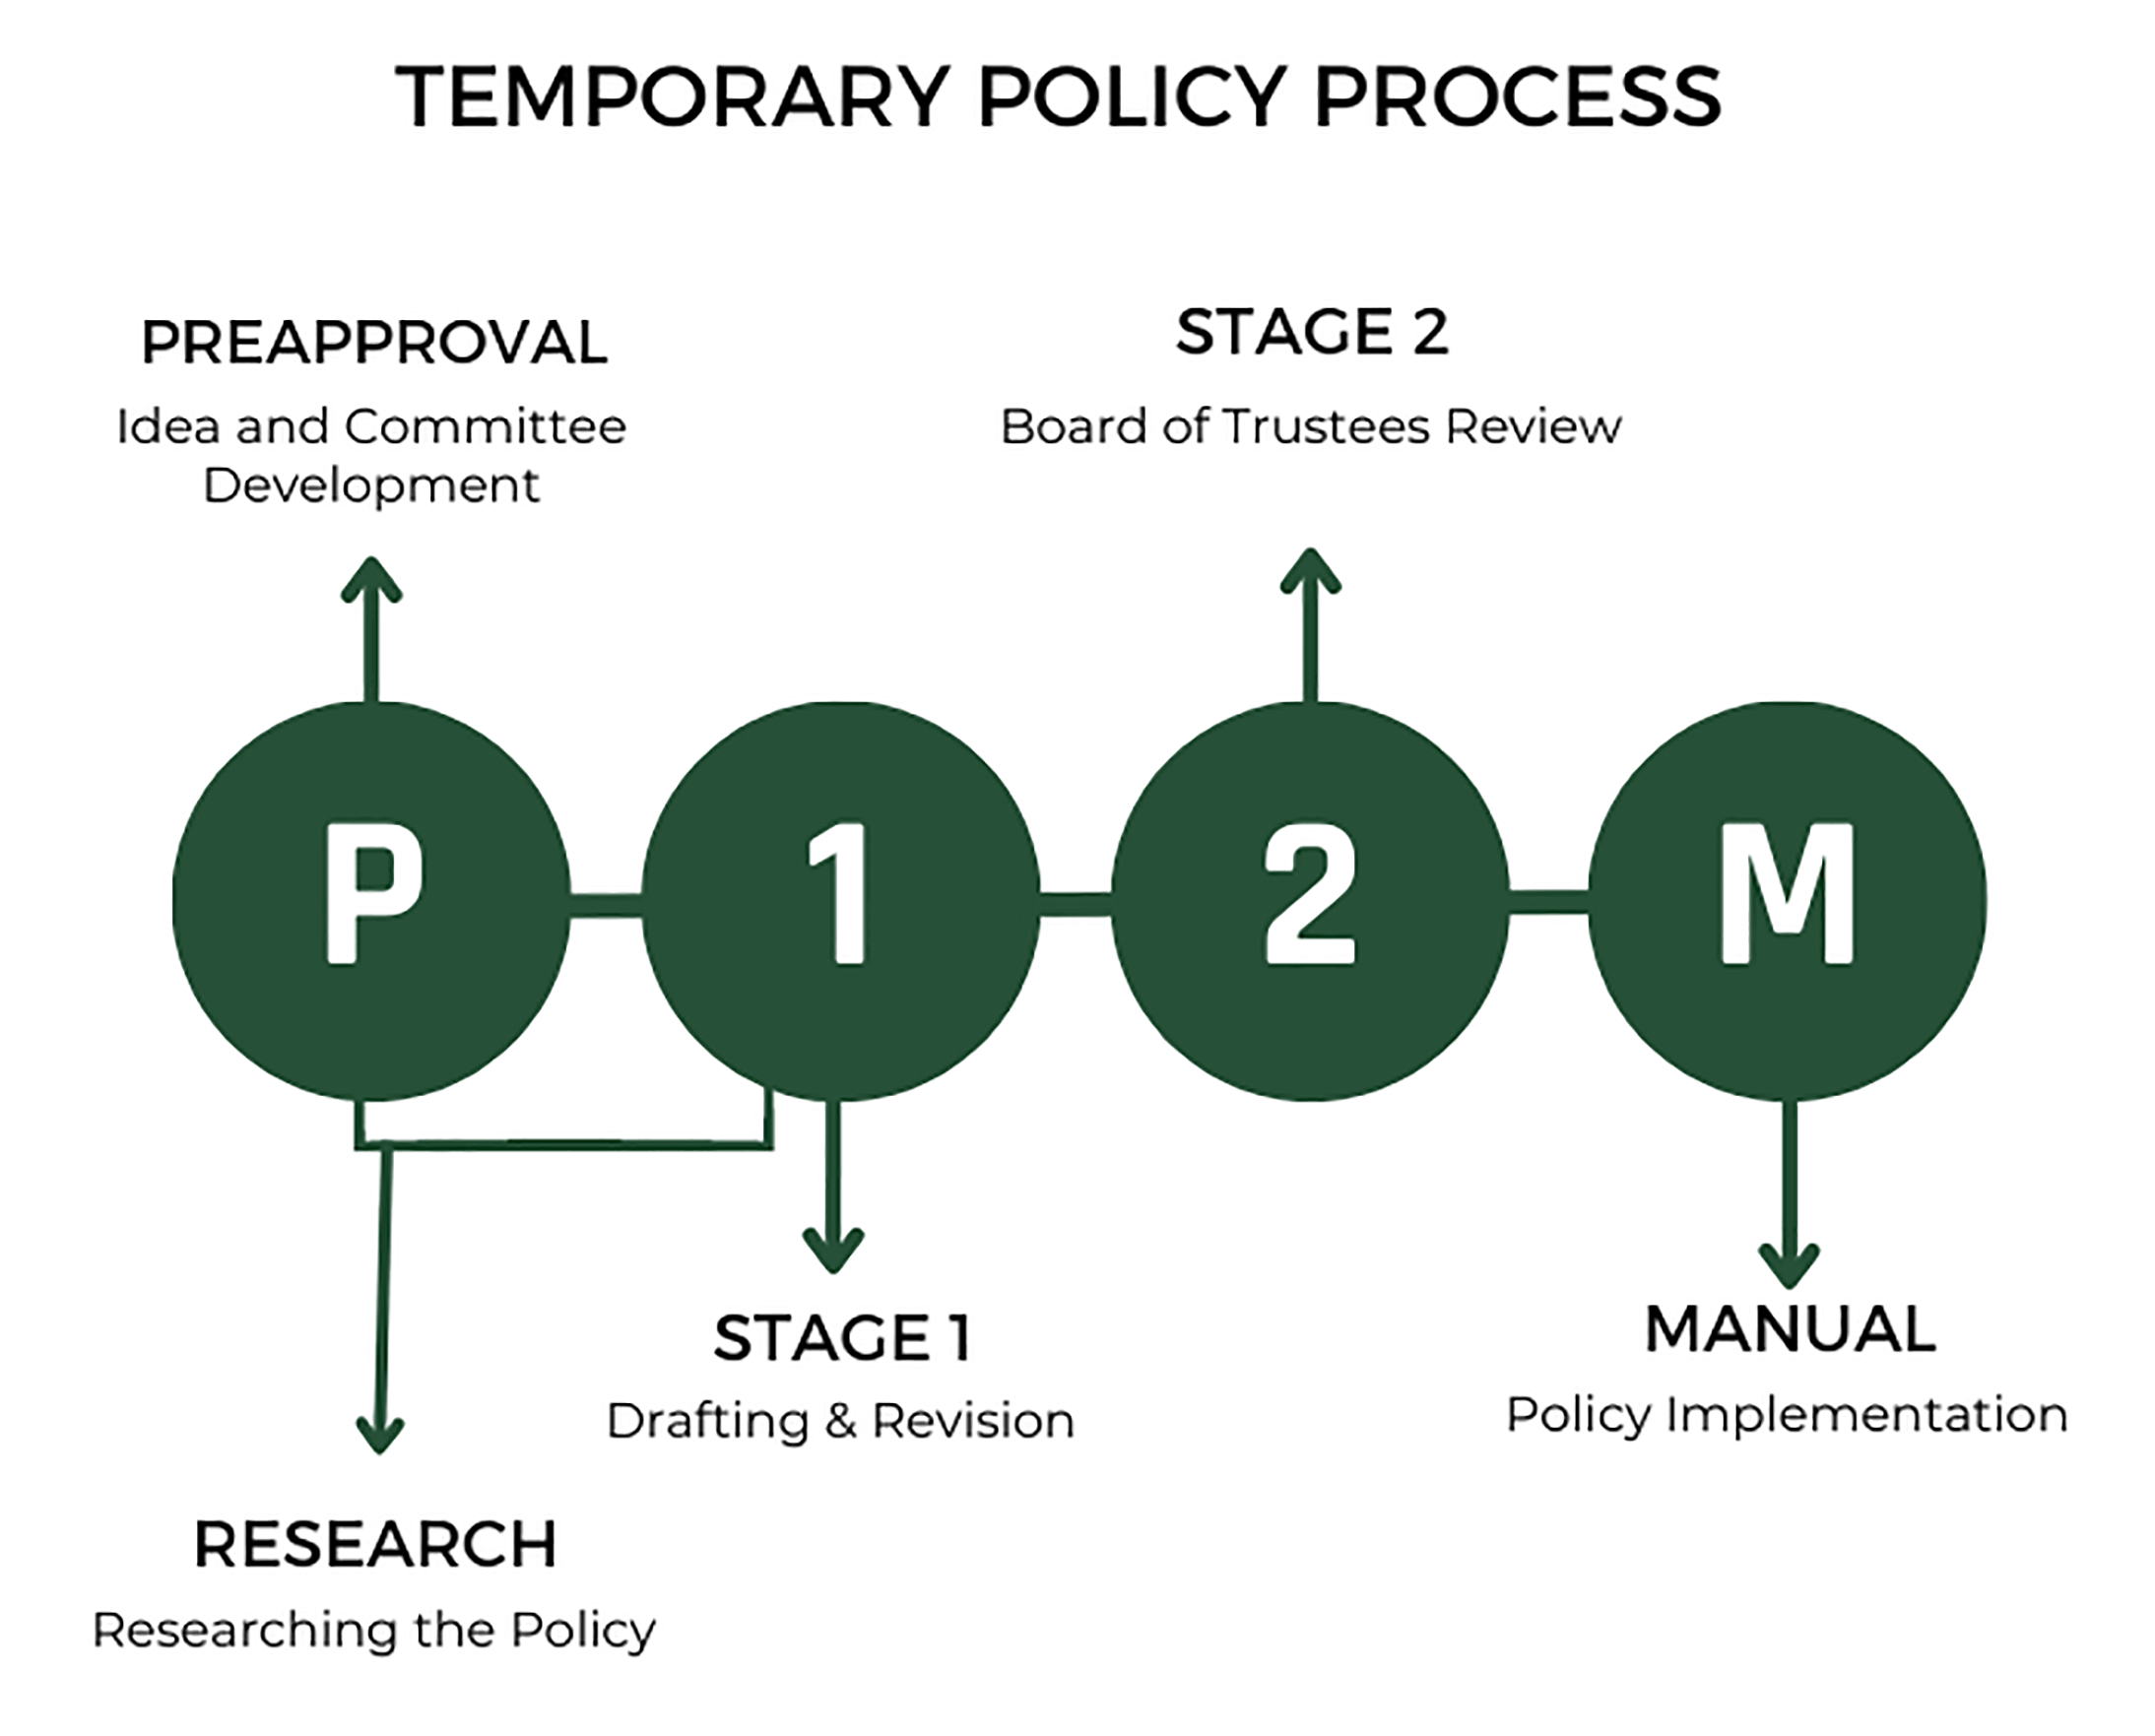 A graphic outlining the temporary policy process. The steps include preapproval, stage 1: drafting and revision, stage 2: board of trustees approval, and policy manual implementation